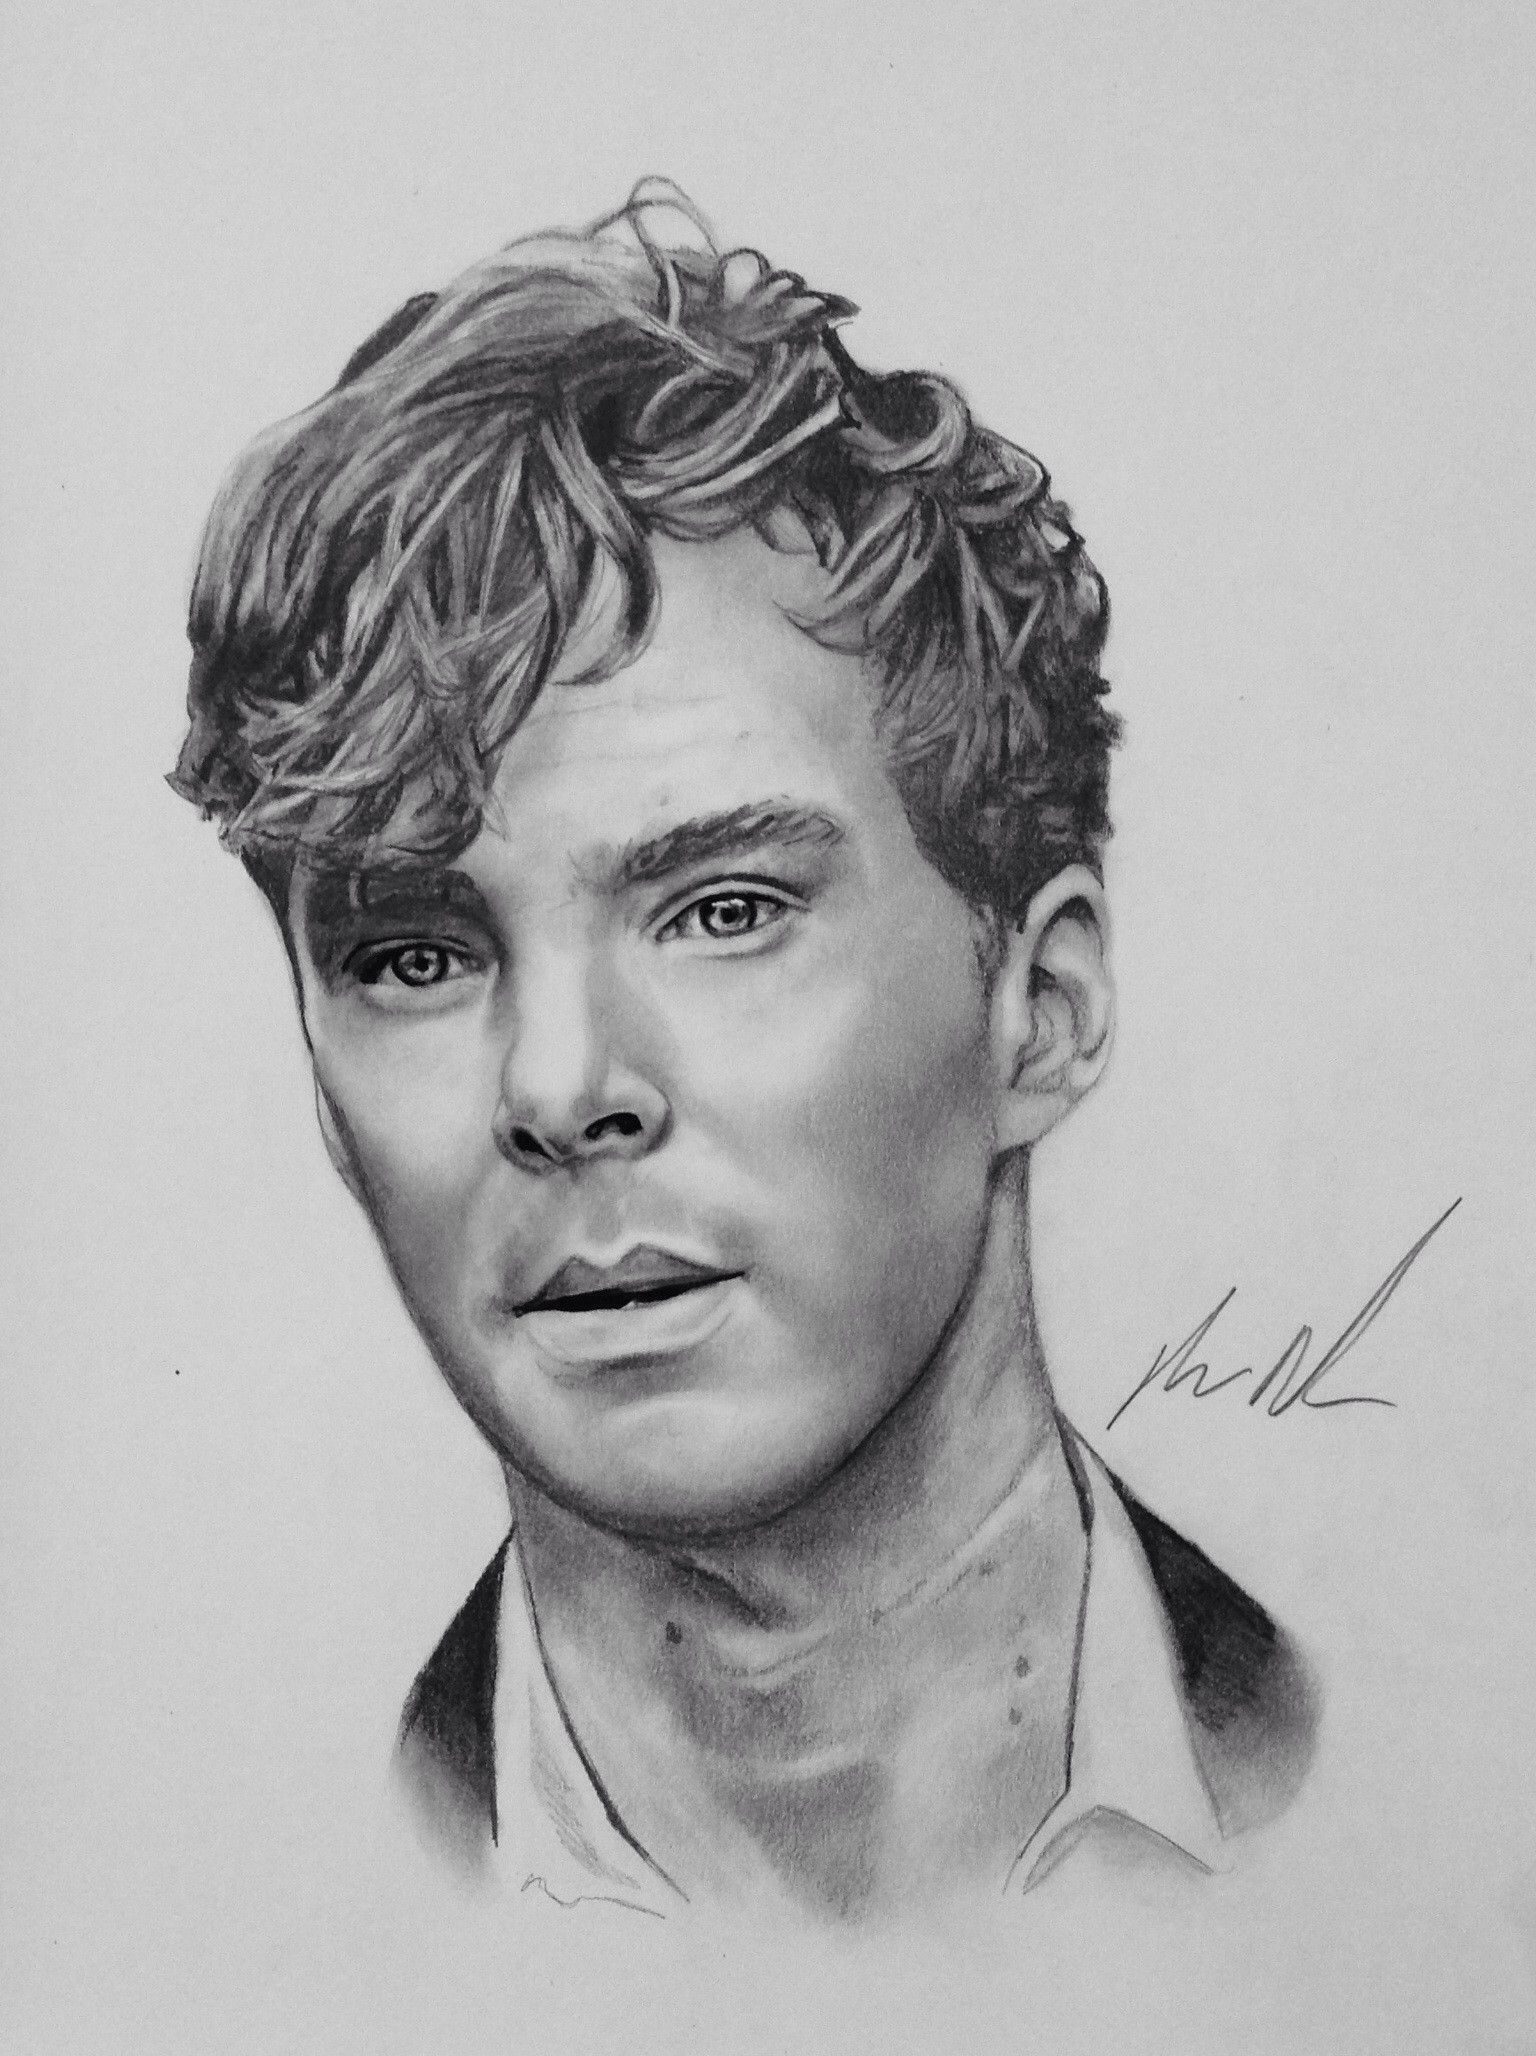 1144651 drawing illustration portrait pattern Benedict Cumberbatch  moustache poster head The Imitation Game Alan Turing ART design  hairstyle sketch modern art album cover  Rare Gallery HD Wallpapers